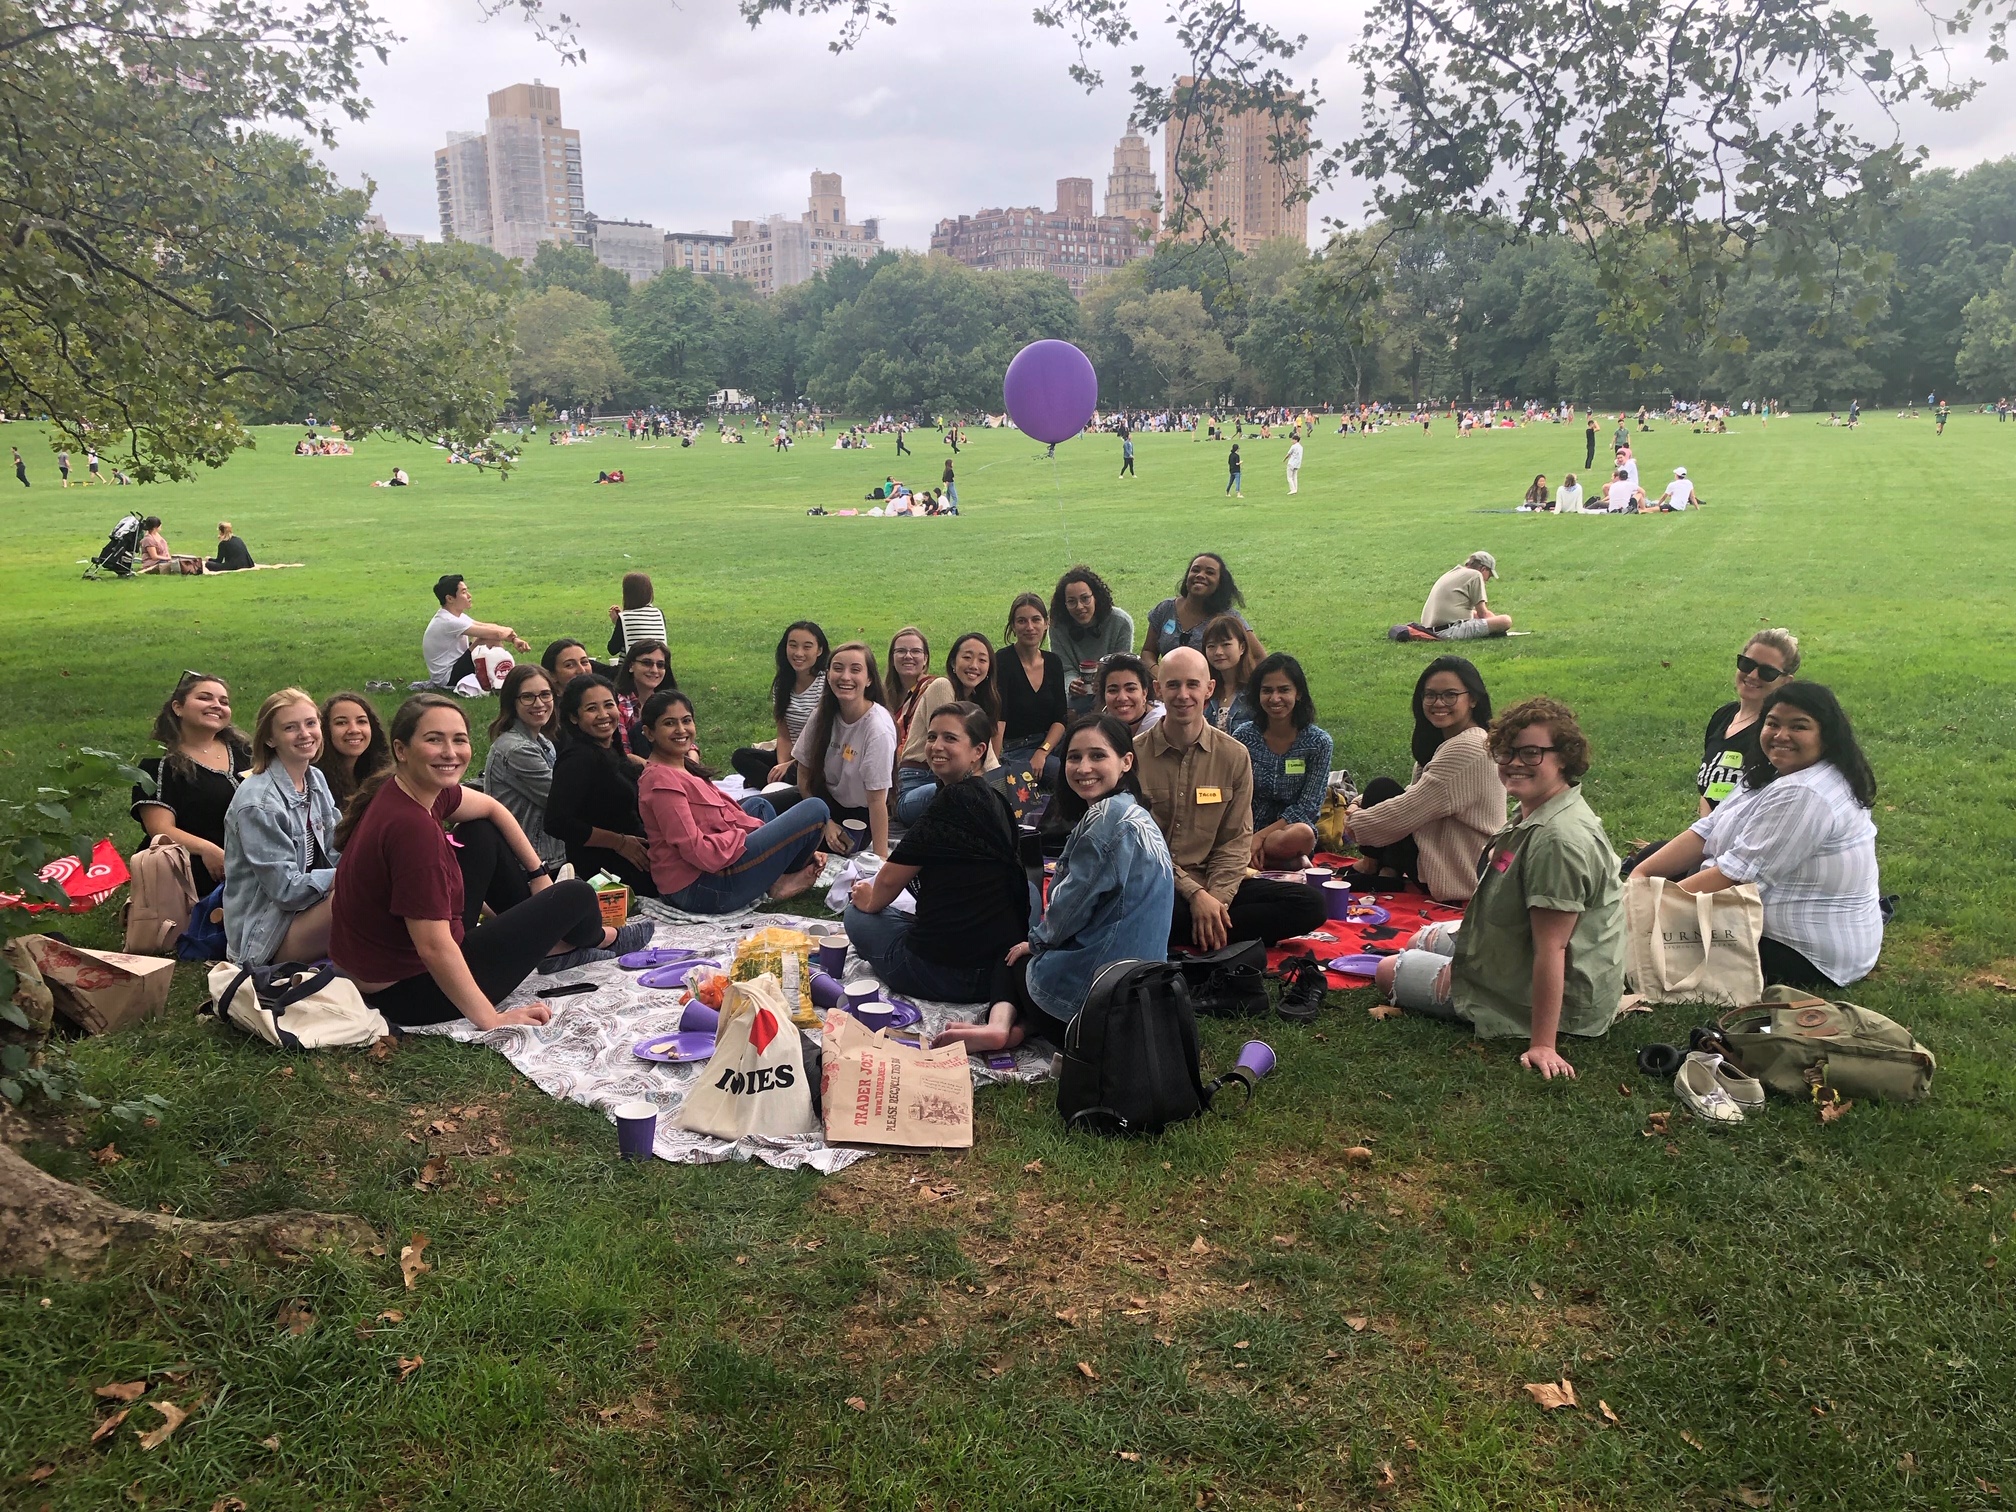 Publishing Students Association (PSA) members have a picnic in New York City's Central Park